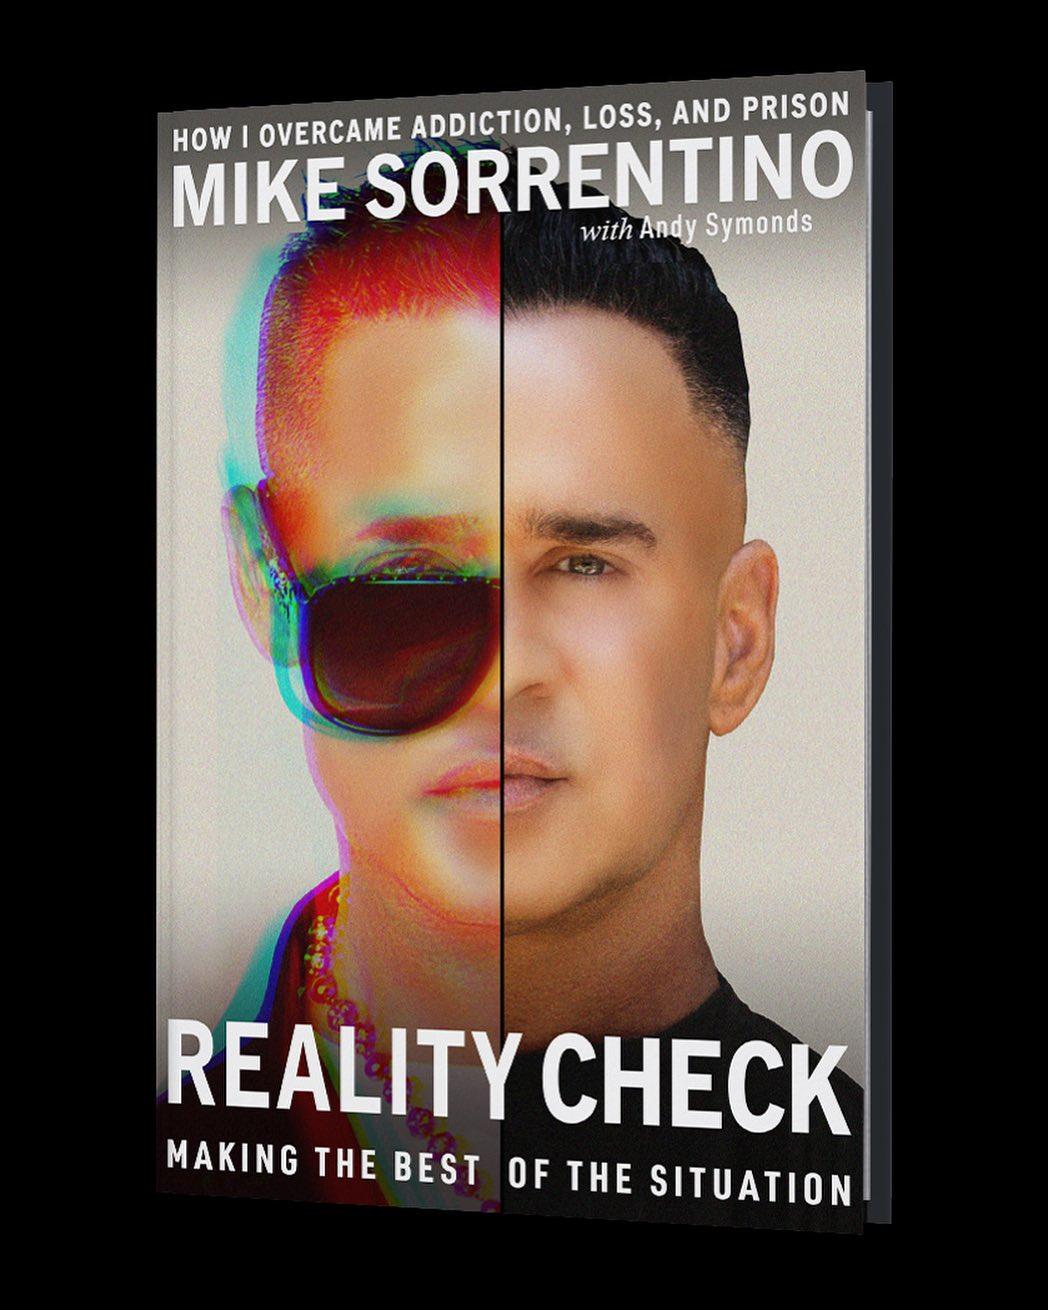 Mike 'The Situation' Sorrentino's Tell-All Memoir Is Set For Fall Release